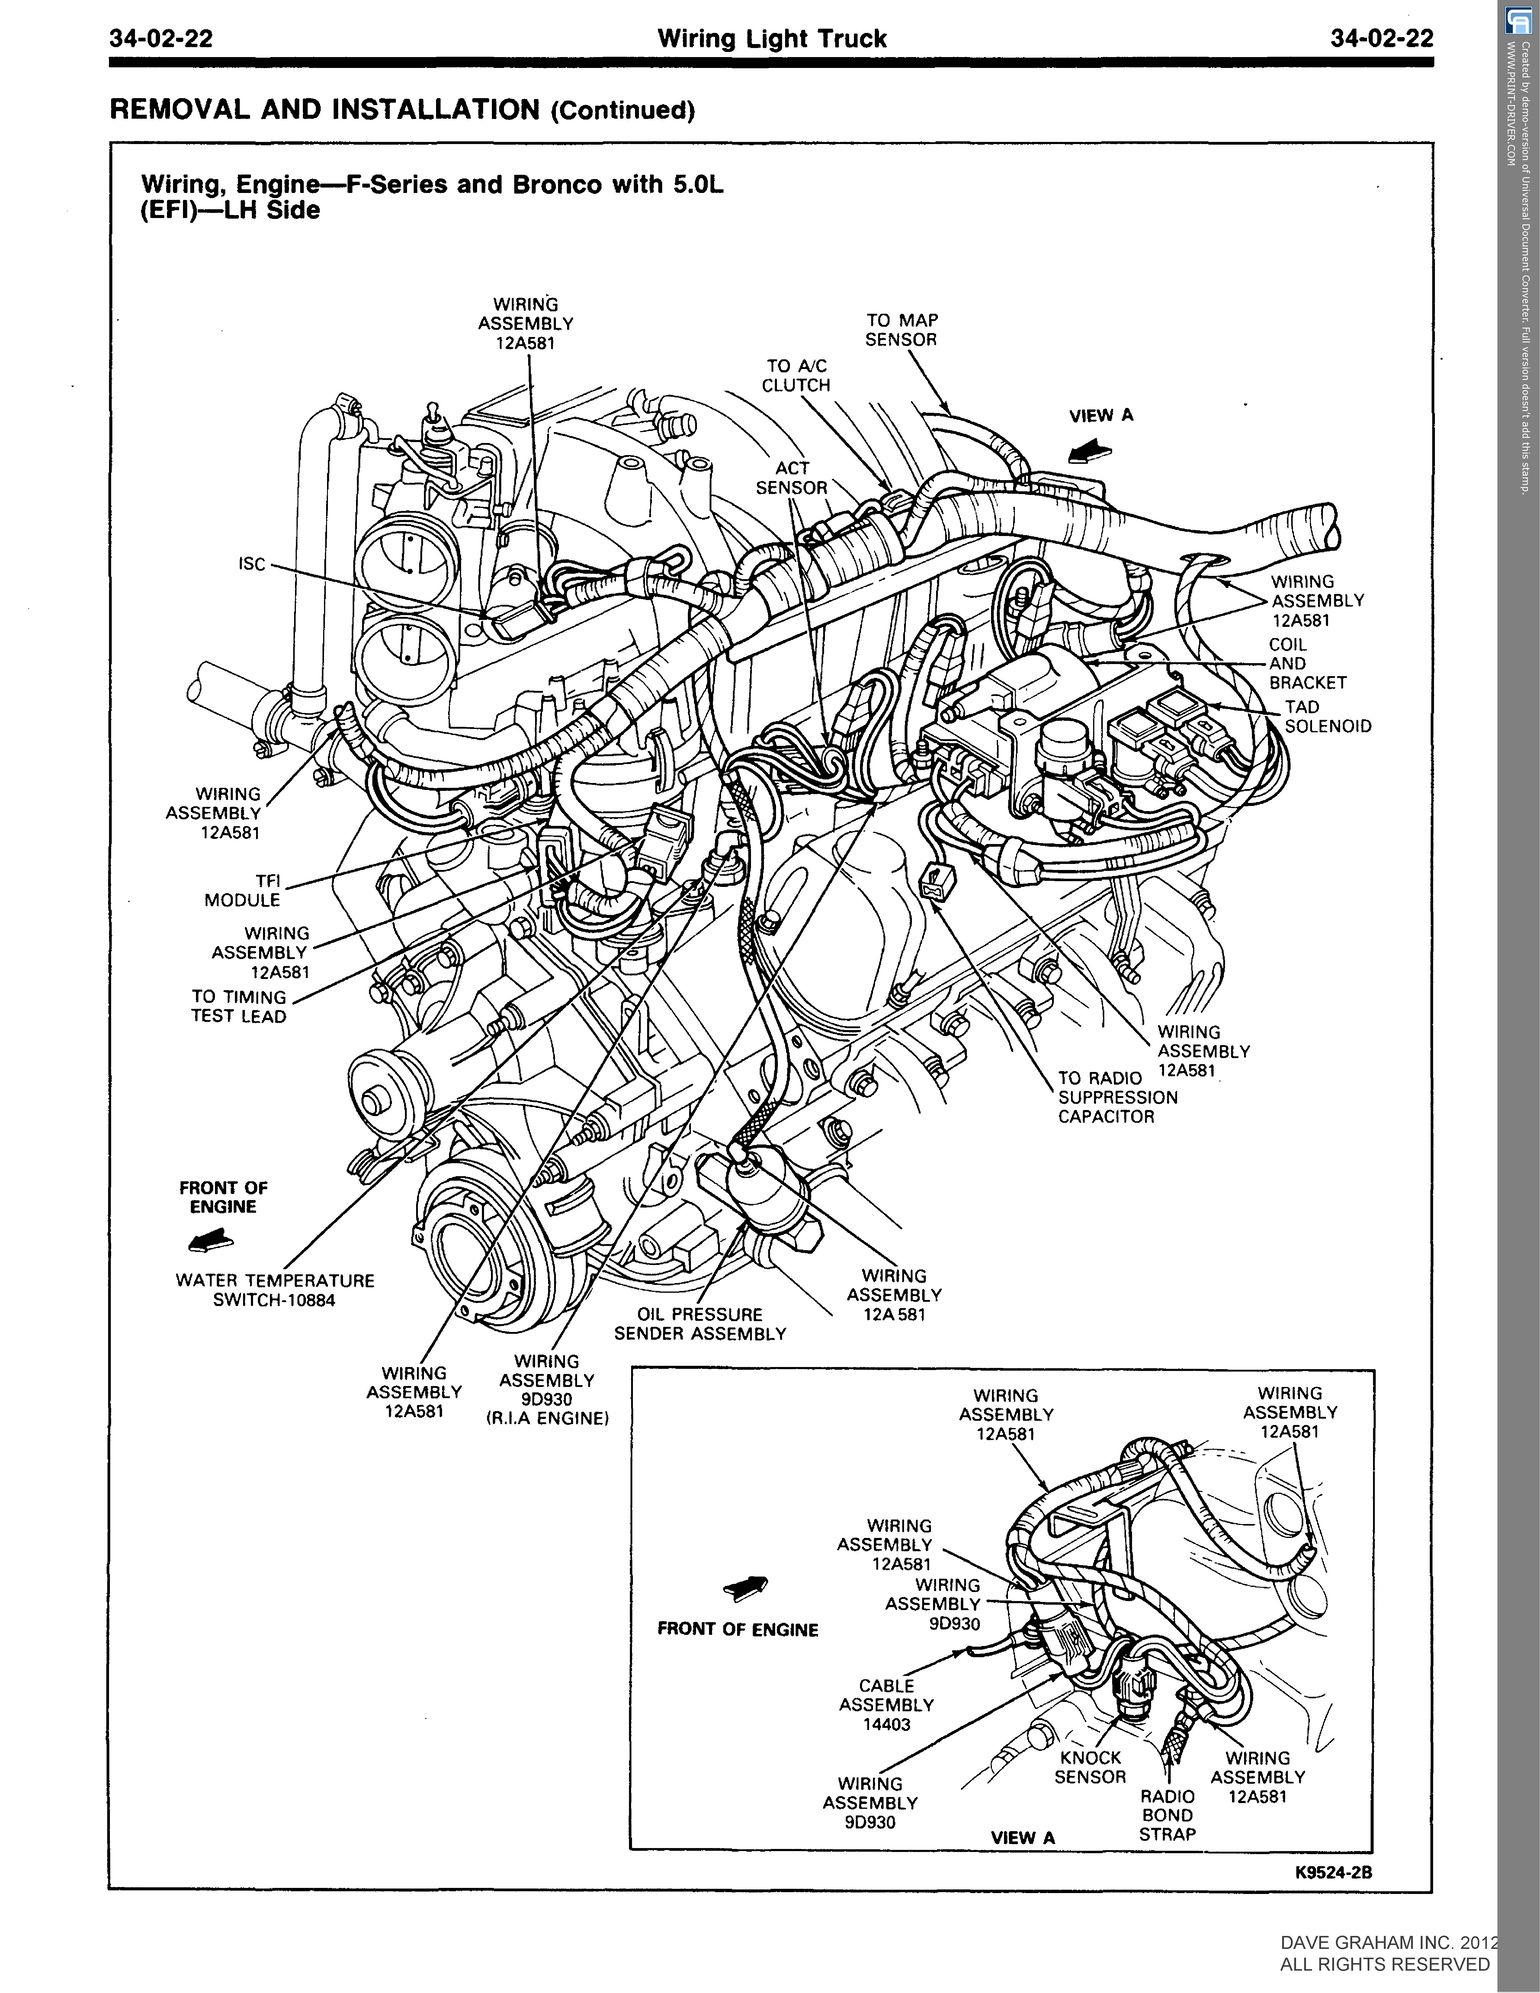 1987 E150 wiring harnesses, engine swap - Ford Truck Enthusiasts Forums